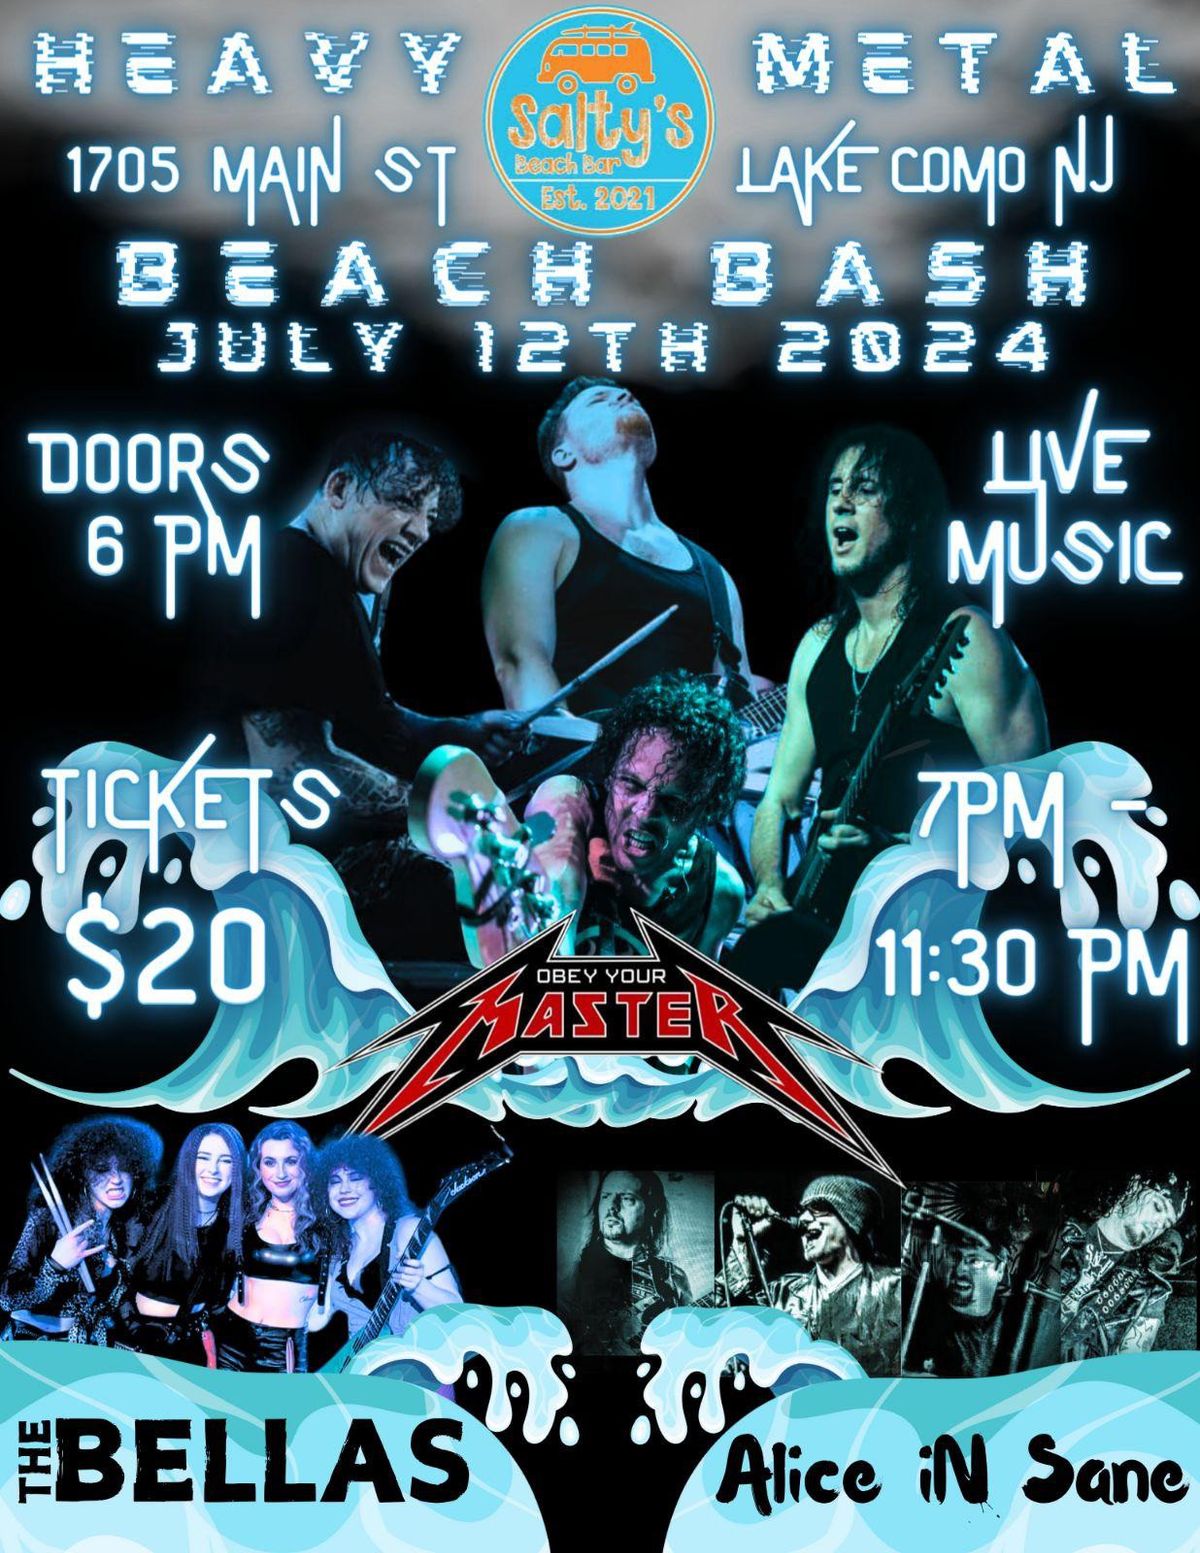 Obey Your Master @ Salty\u2019s Beach Bar w\/ Alice-In-Sane (Alice In Chains tribute) & The Bellas